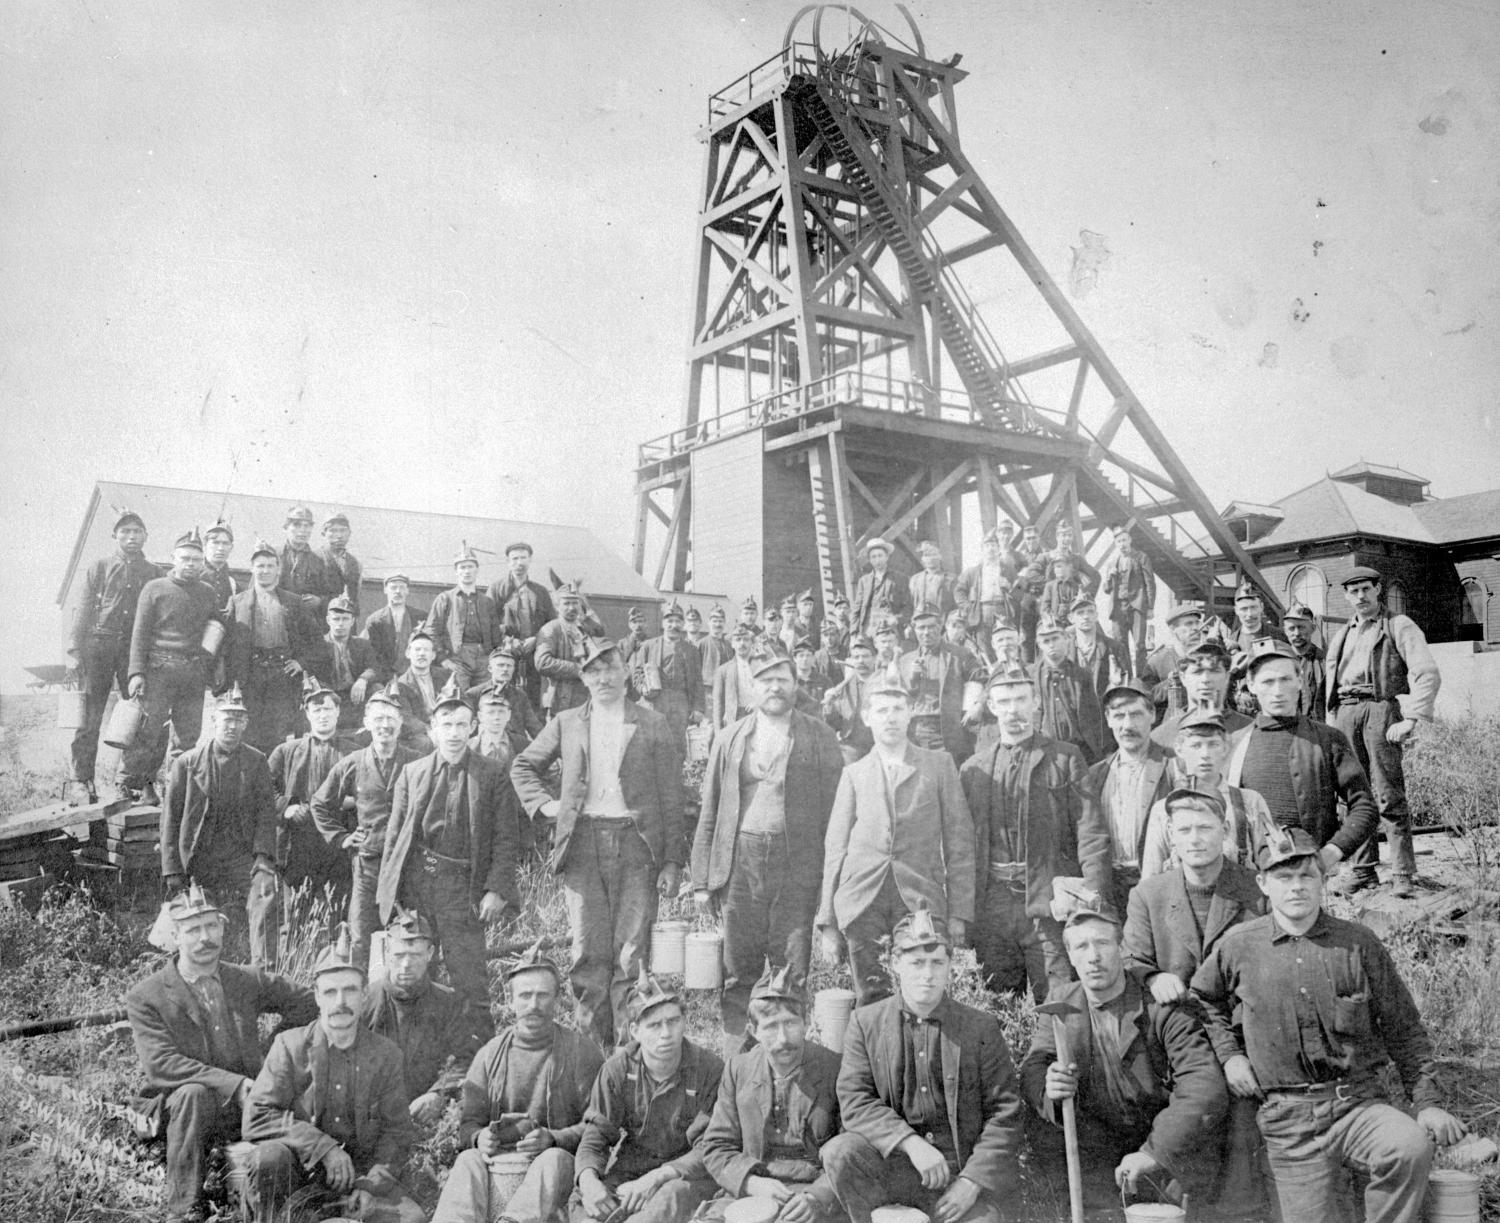 Group of Nanaimo coal miners at the pithead.